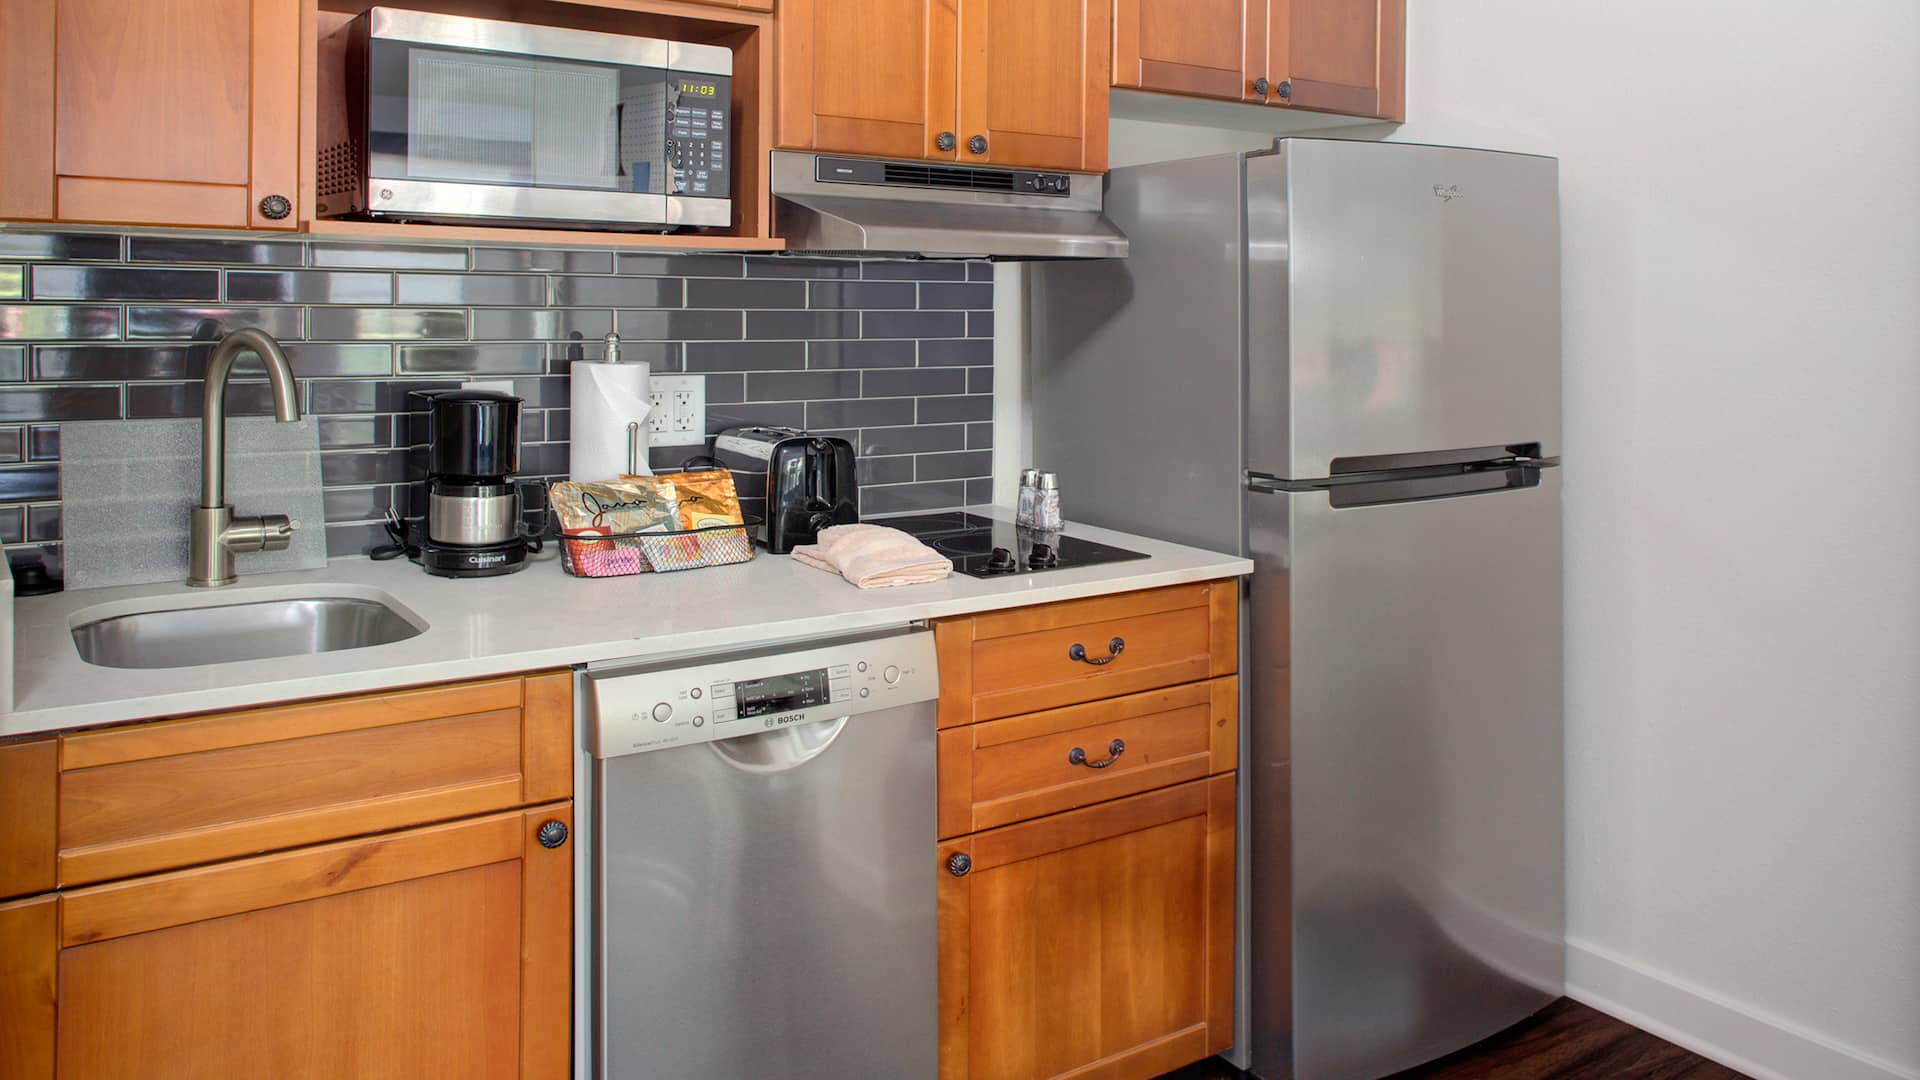 Extended stay kitchen with fridge, dishwasher, microwave, sink, toaster, and stove at Hyatt House Parsippany East